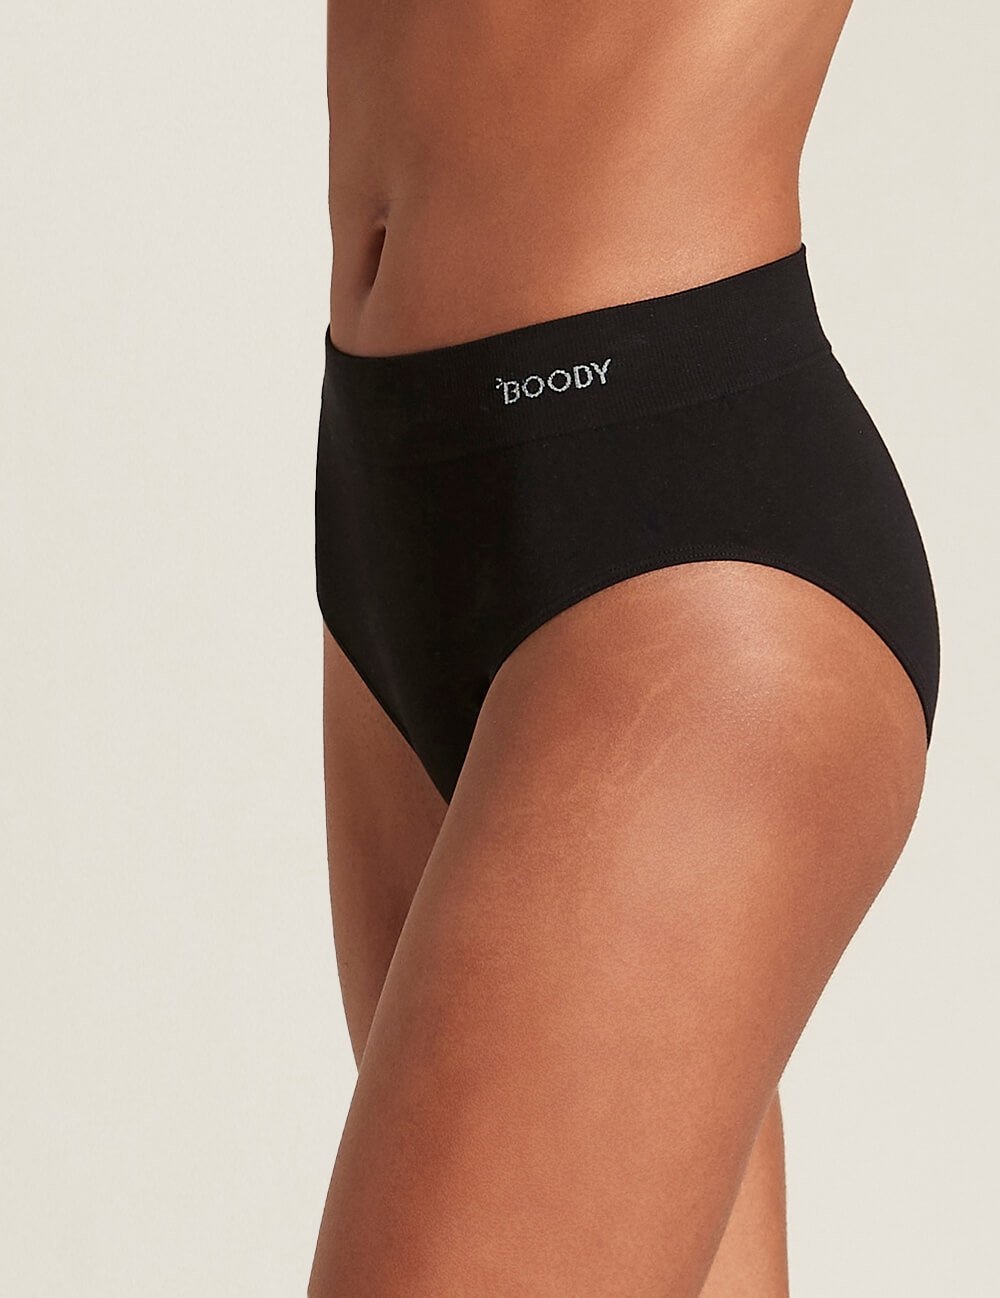 Women's briefs - Hipsters - 2 Pieces - Black - Boody - Koning Bamboe